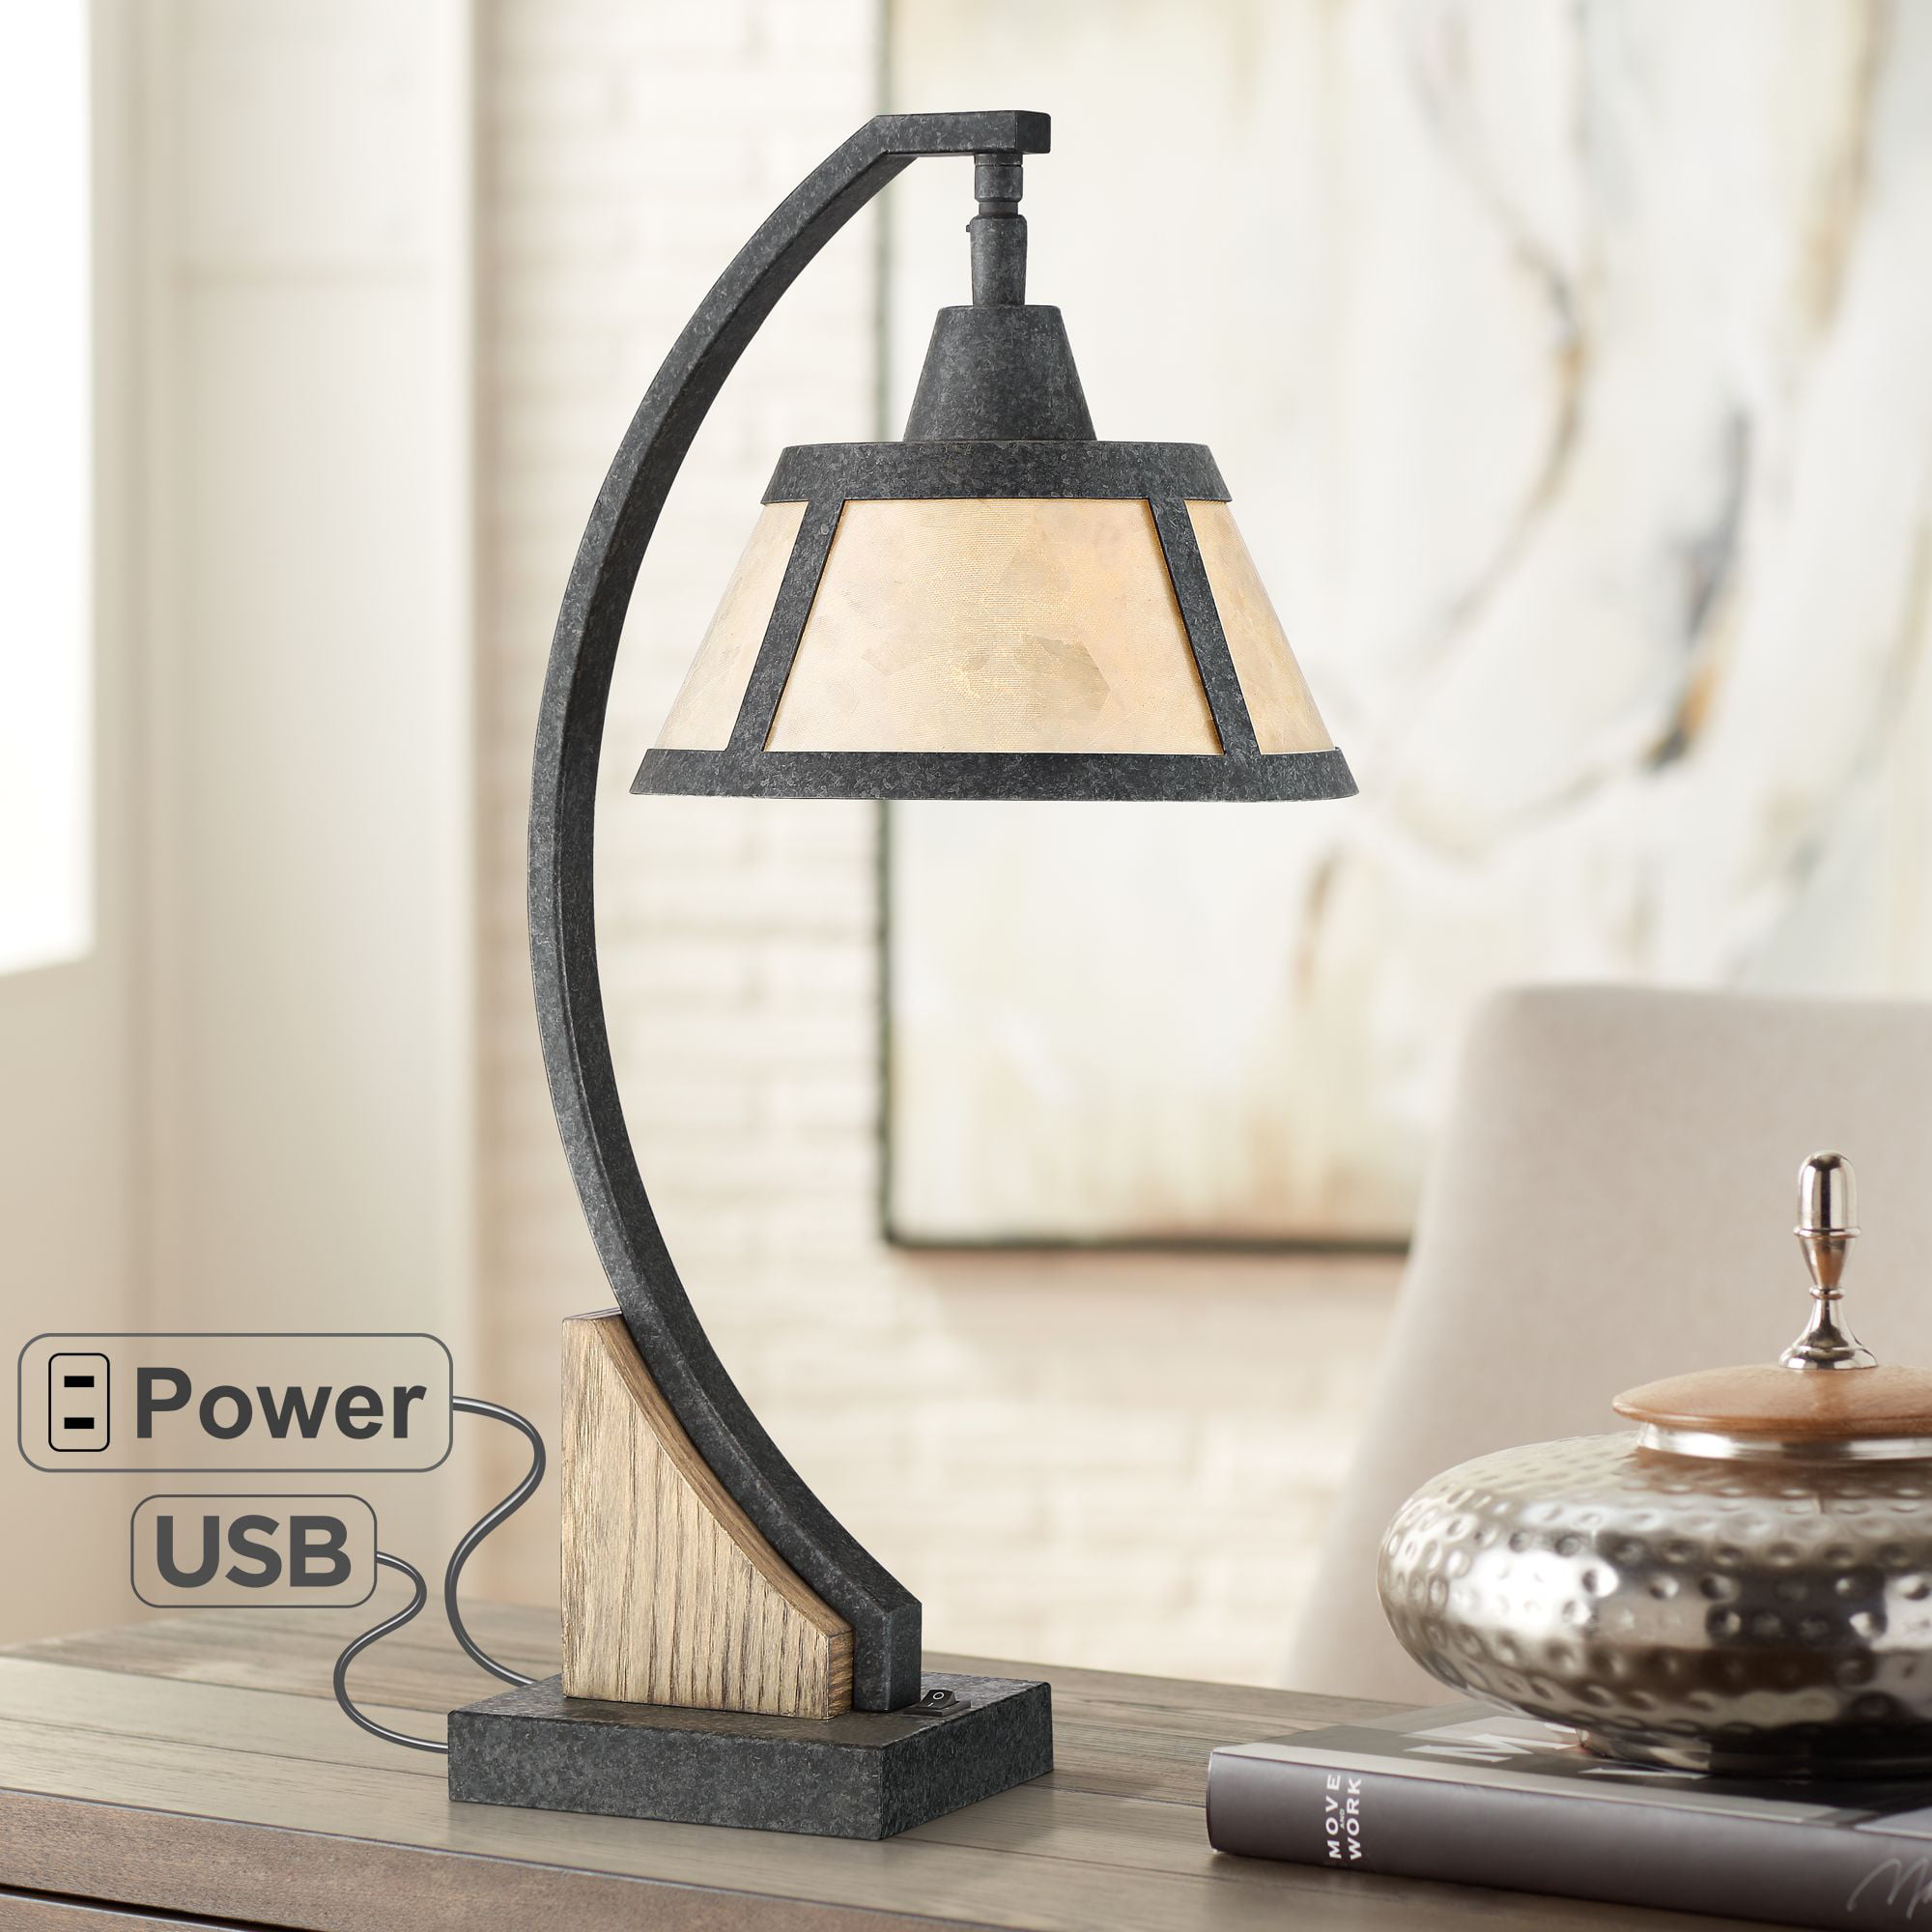 Base Gray Wash Mica Shade, Wrought Iron Bedside Table Lamps With Usb Ports